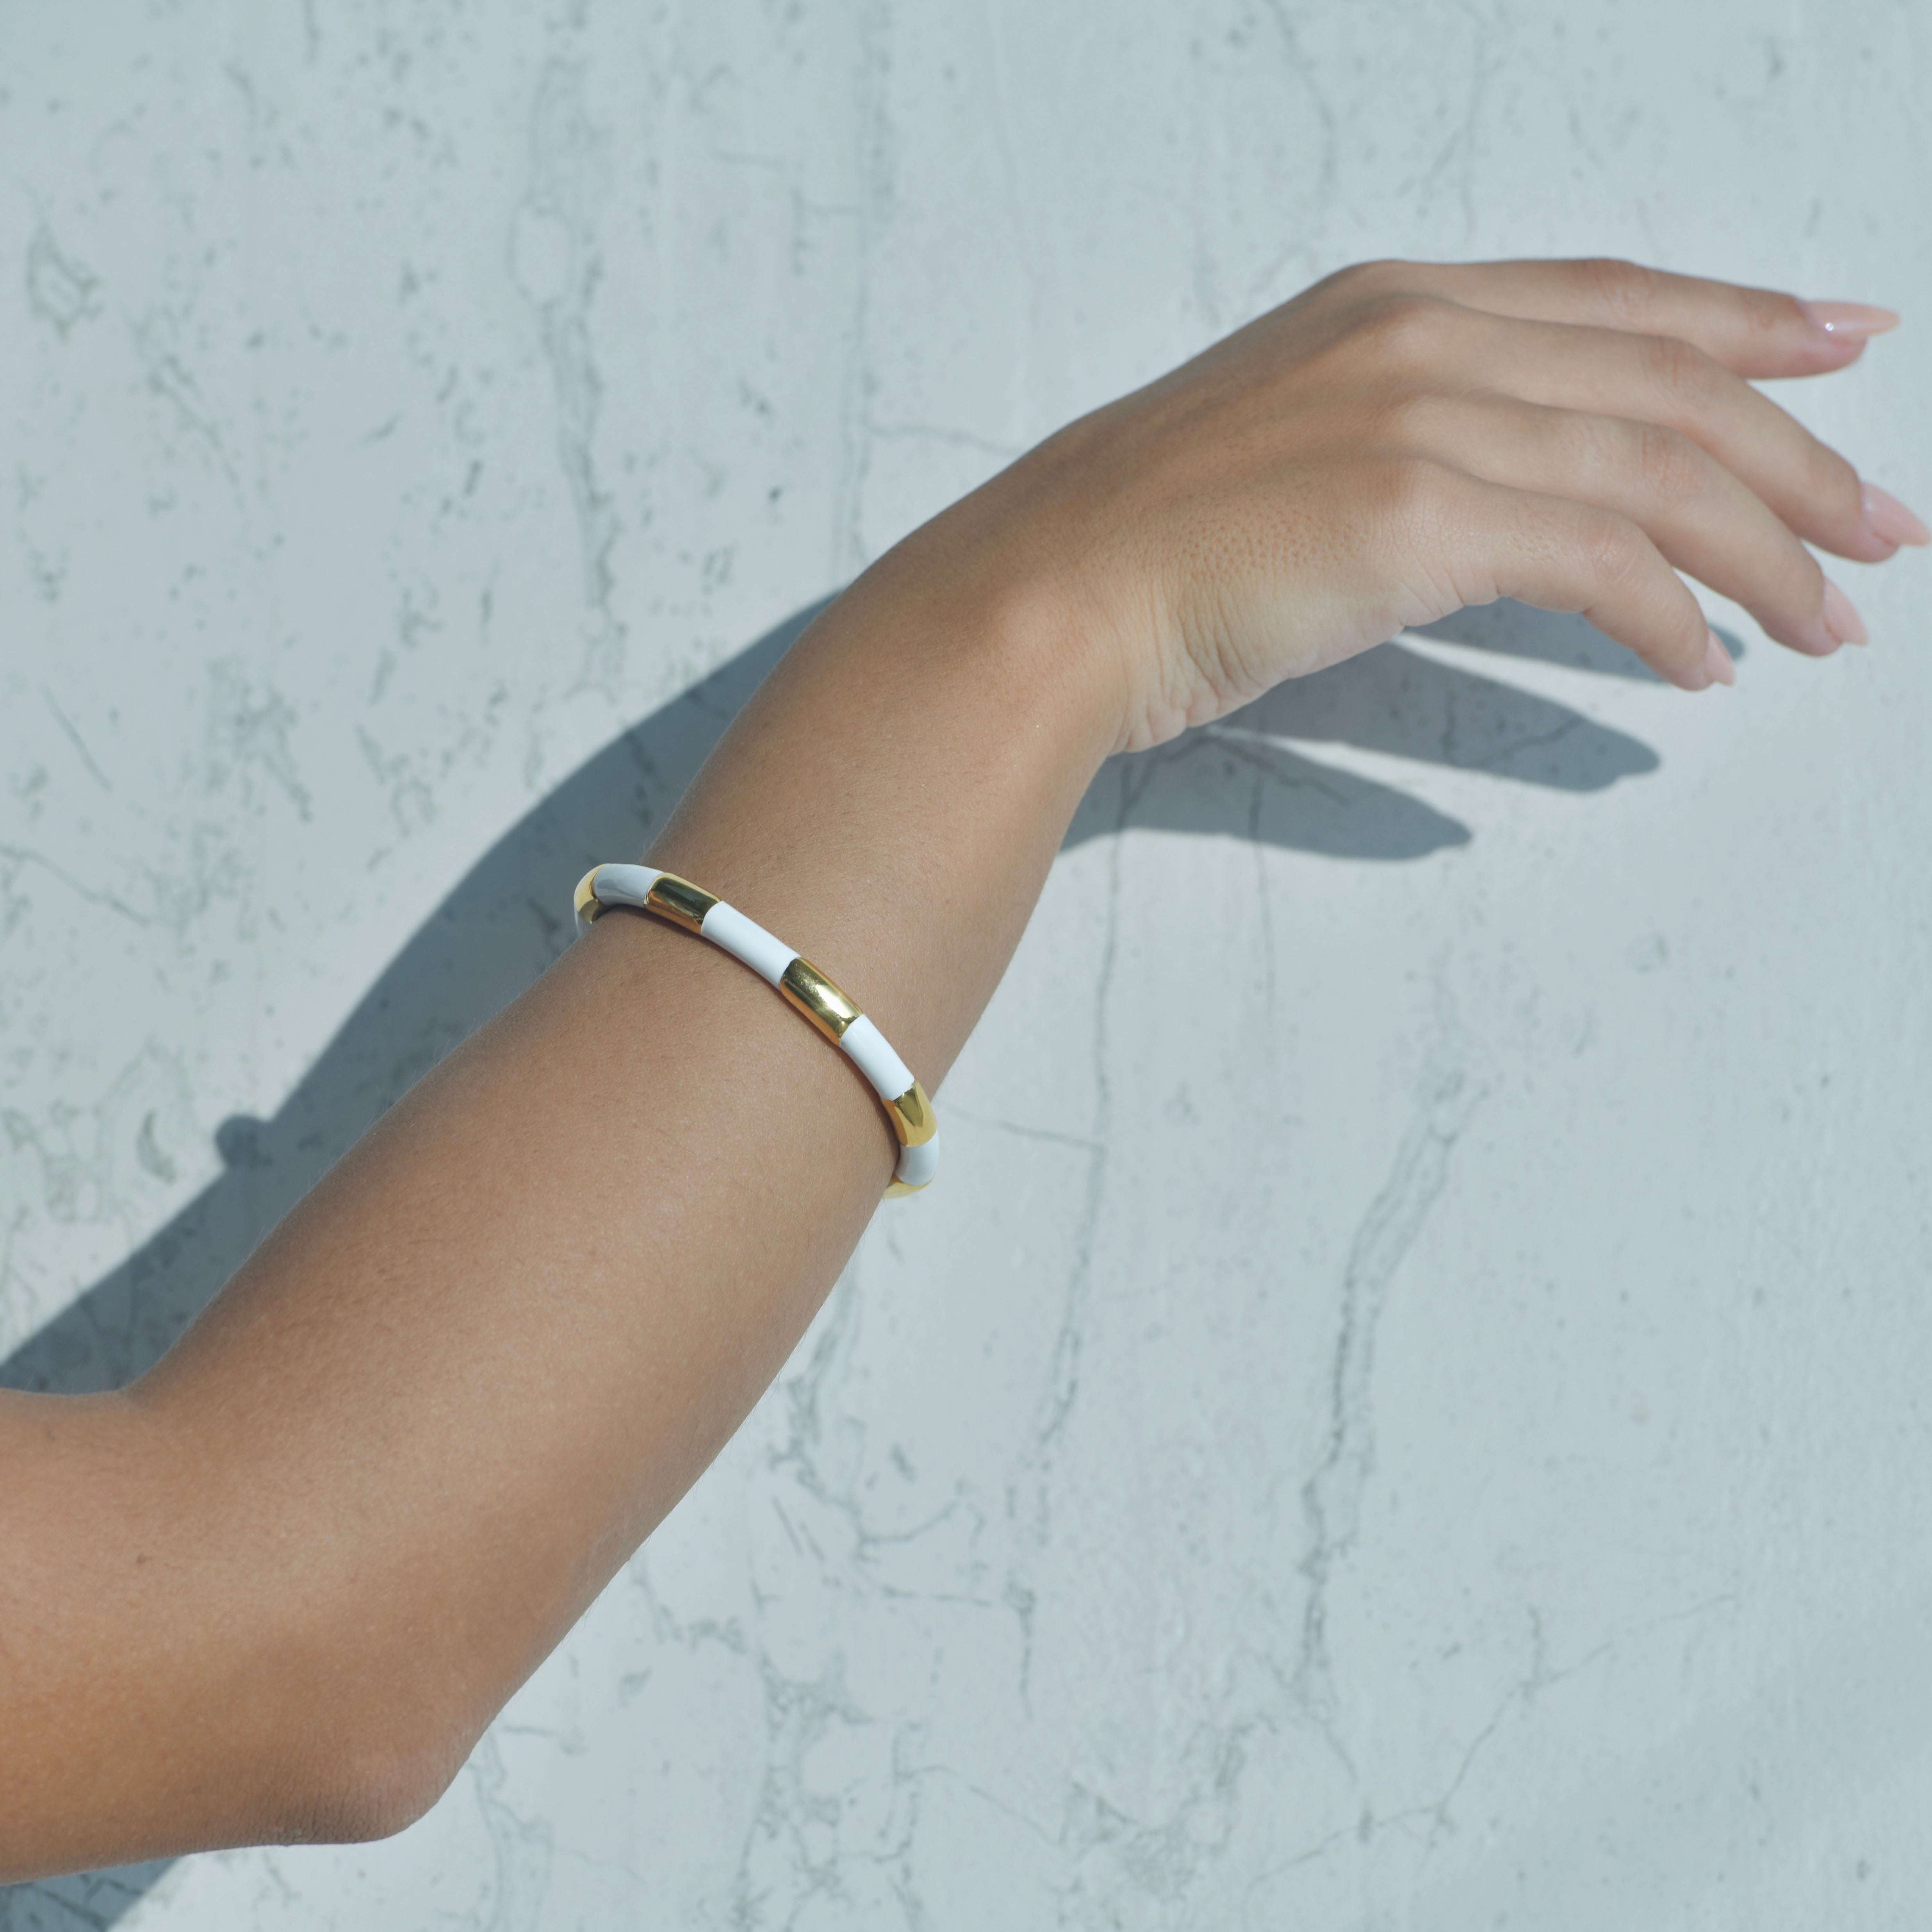 Gold Cuff bracelet. White enamel painted creating the idea of a white ribbon around the gold cuff.